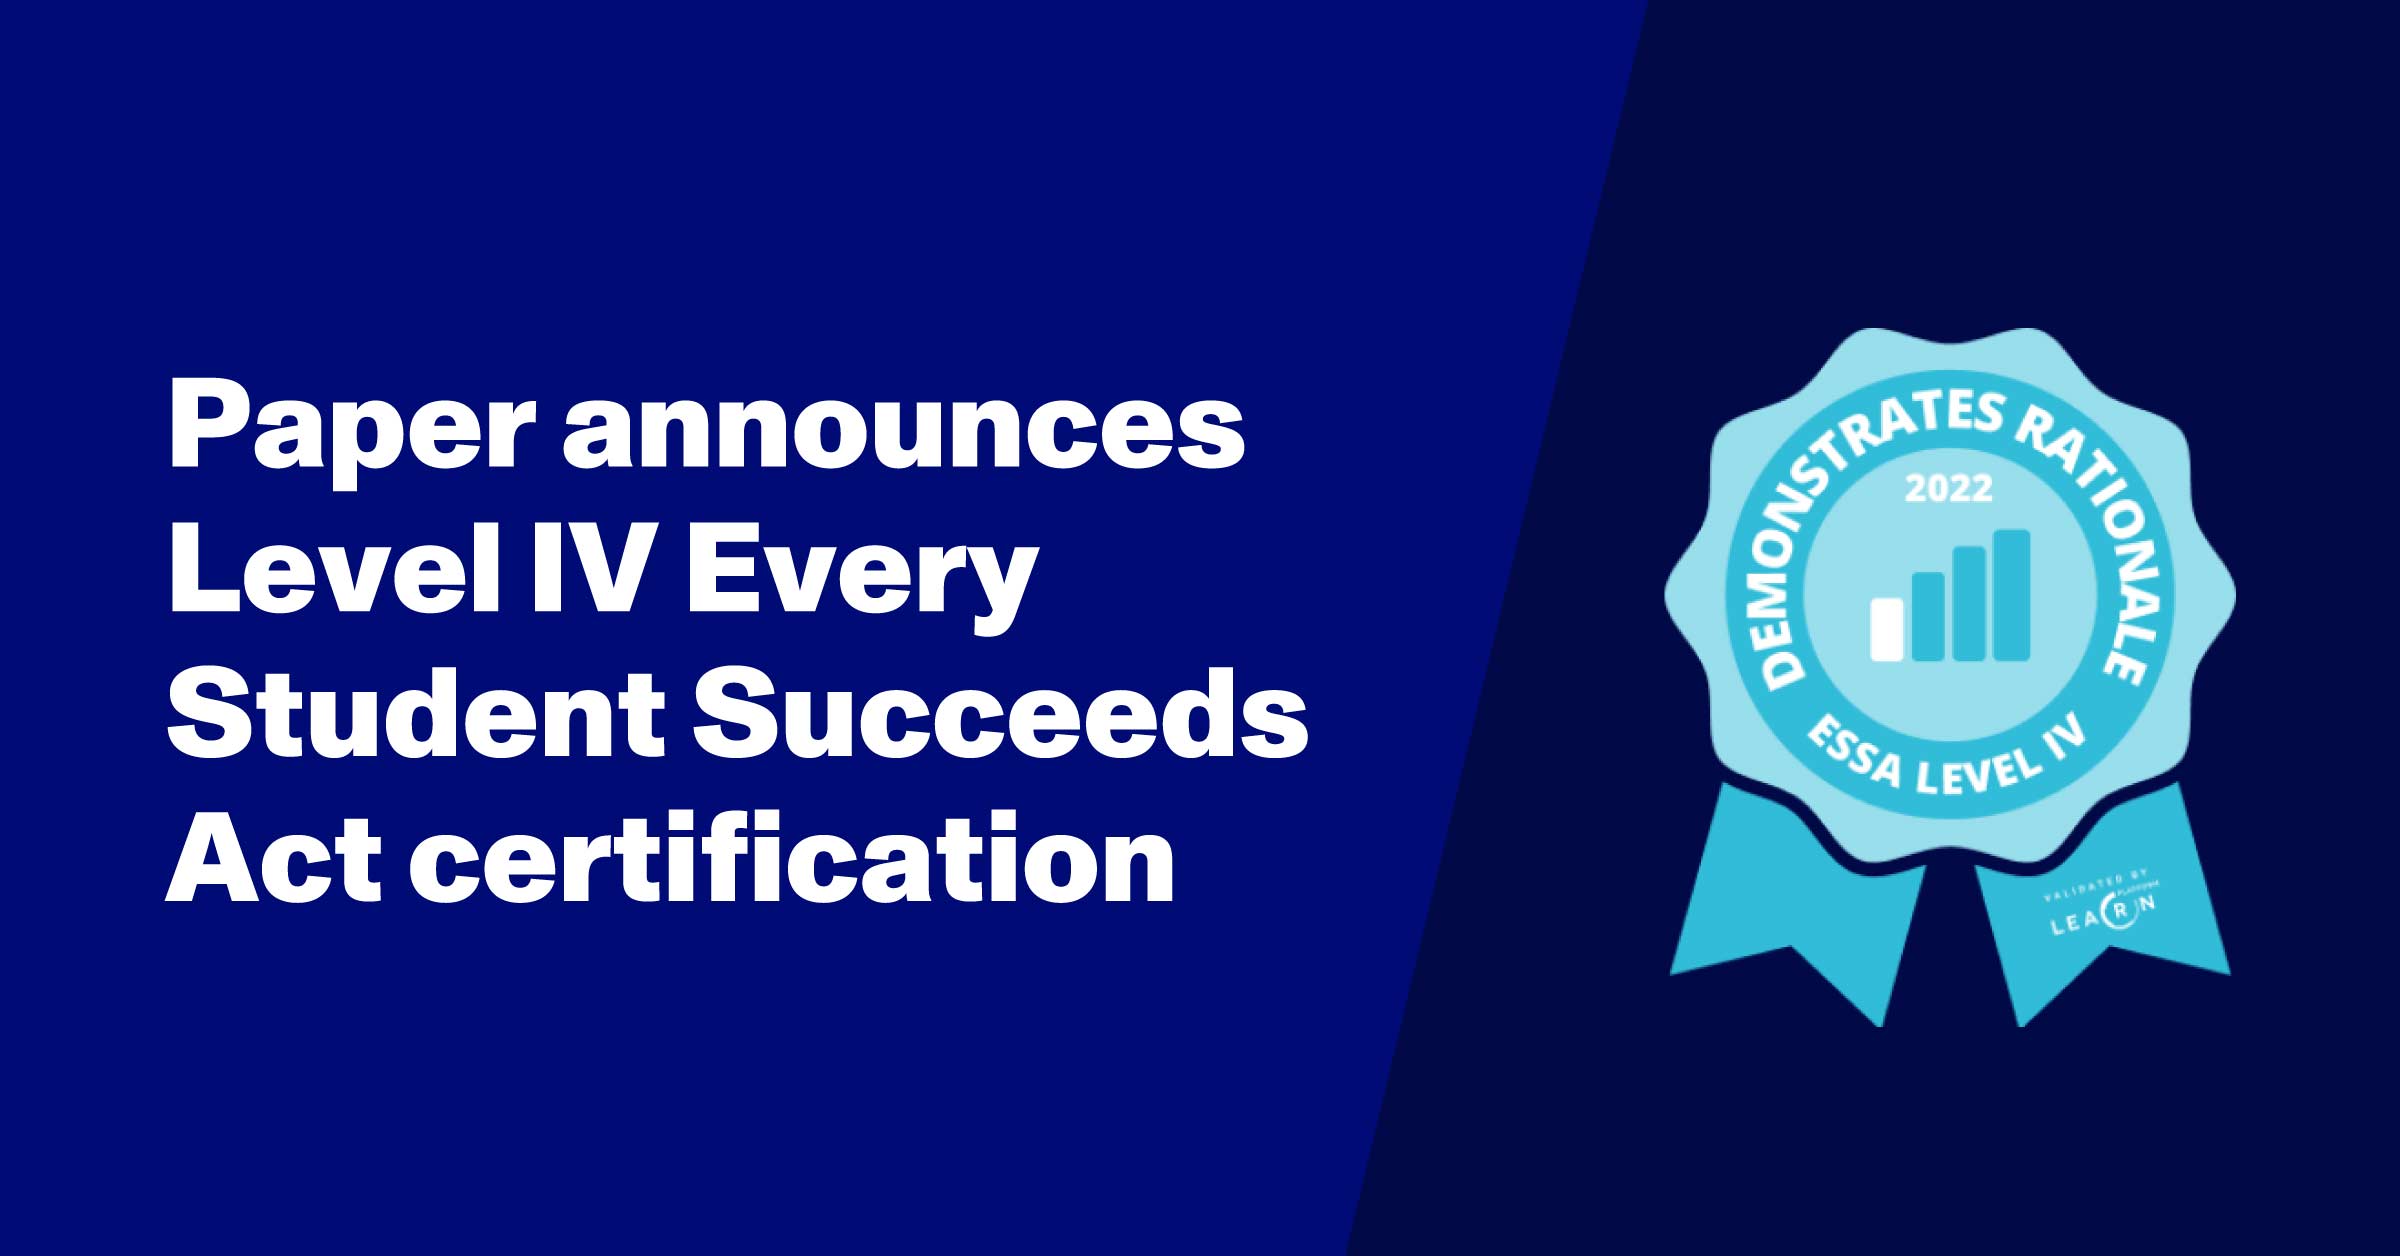 Paper announces Level IV Every Student Succeeds Act certification